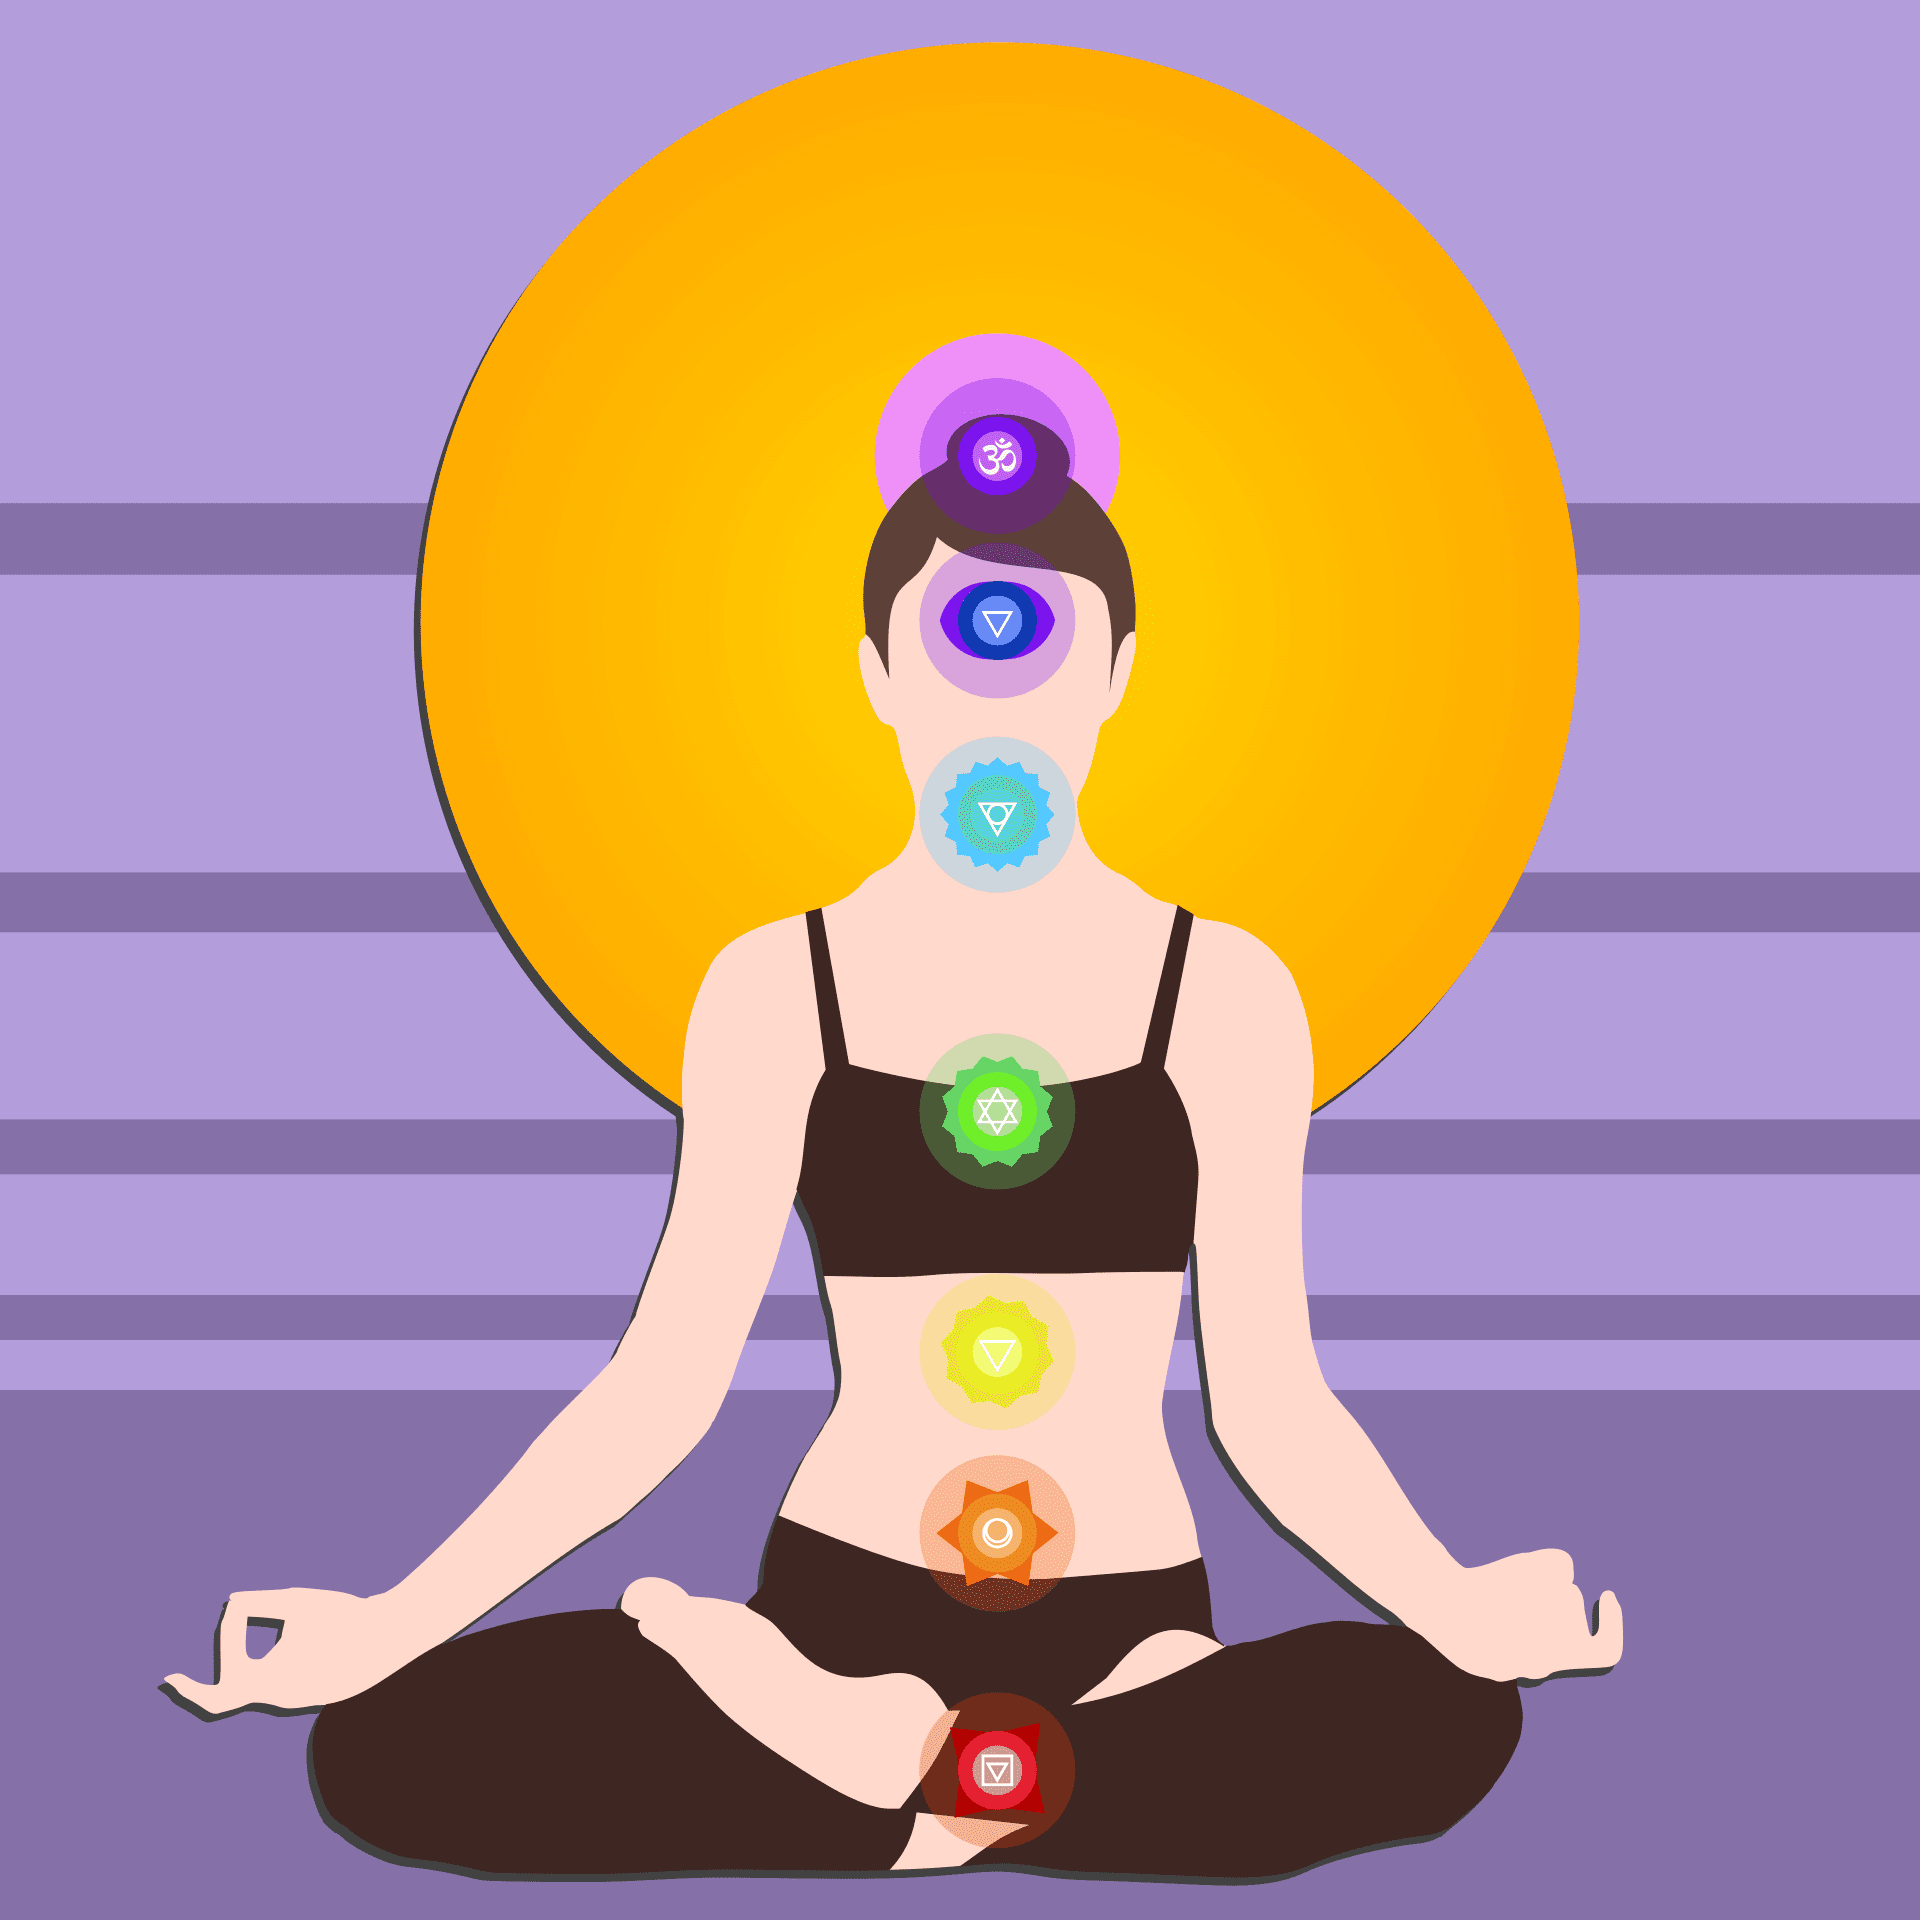 Basic Introduction to the 7 Chakras and their energy system